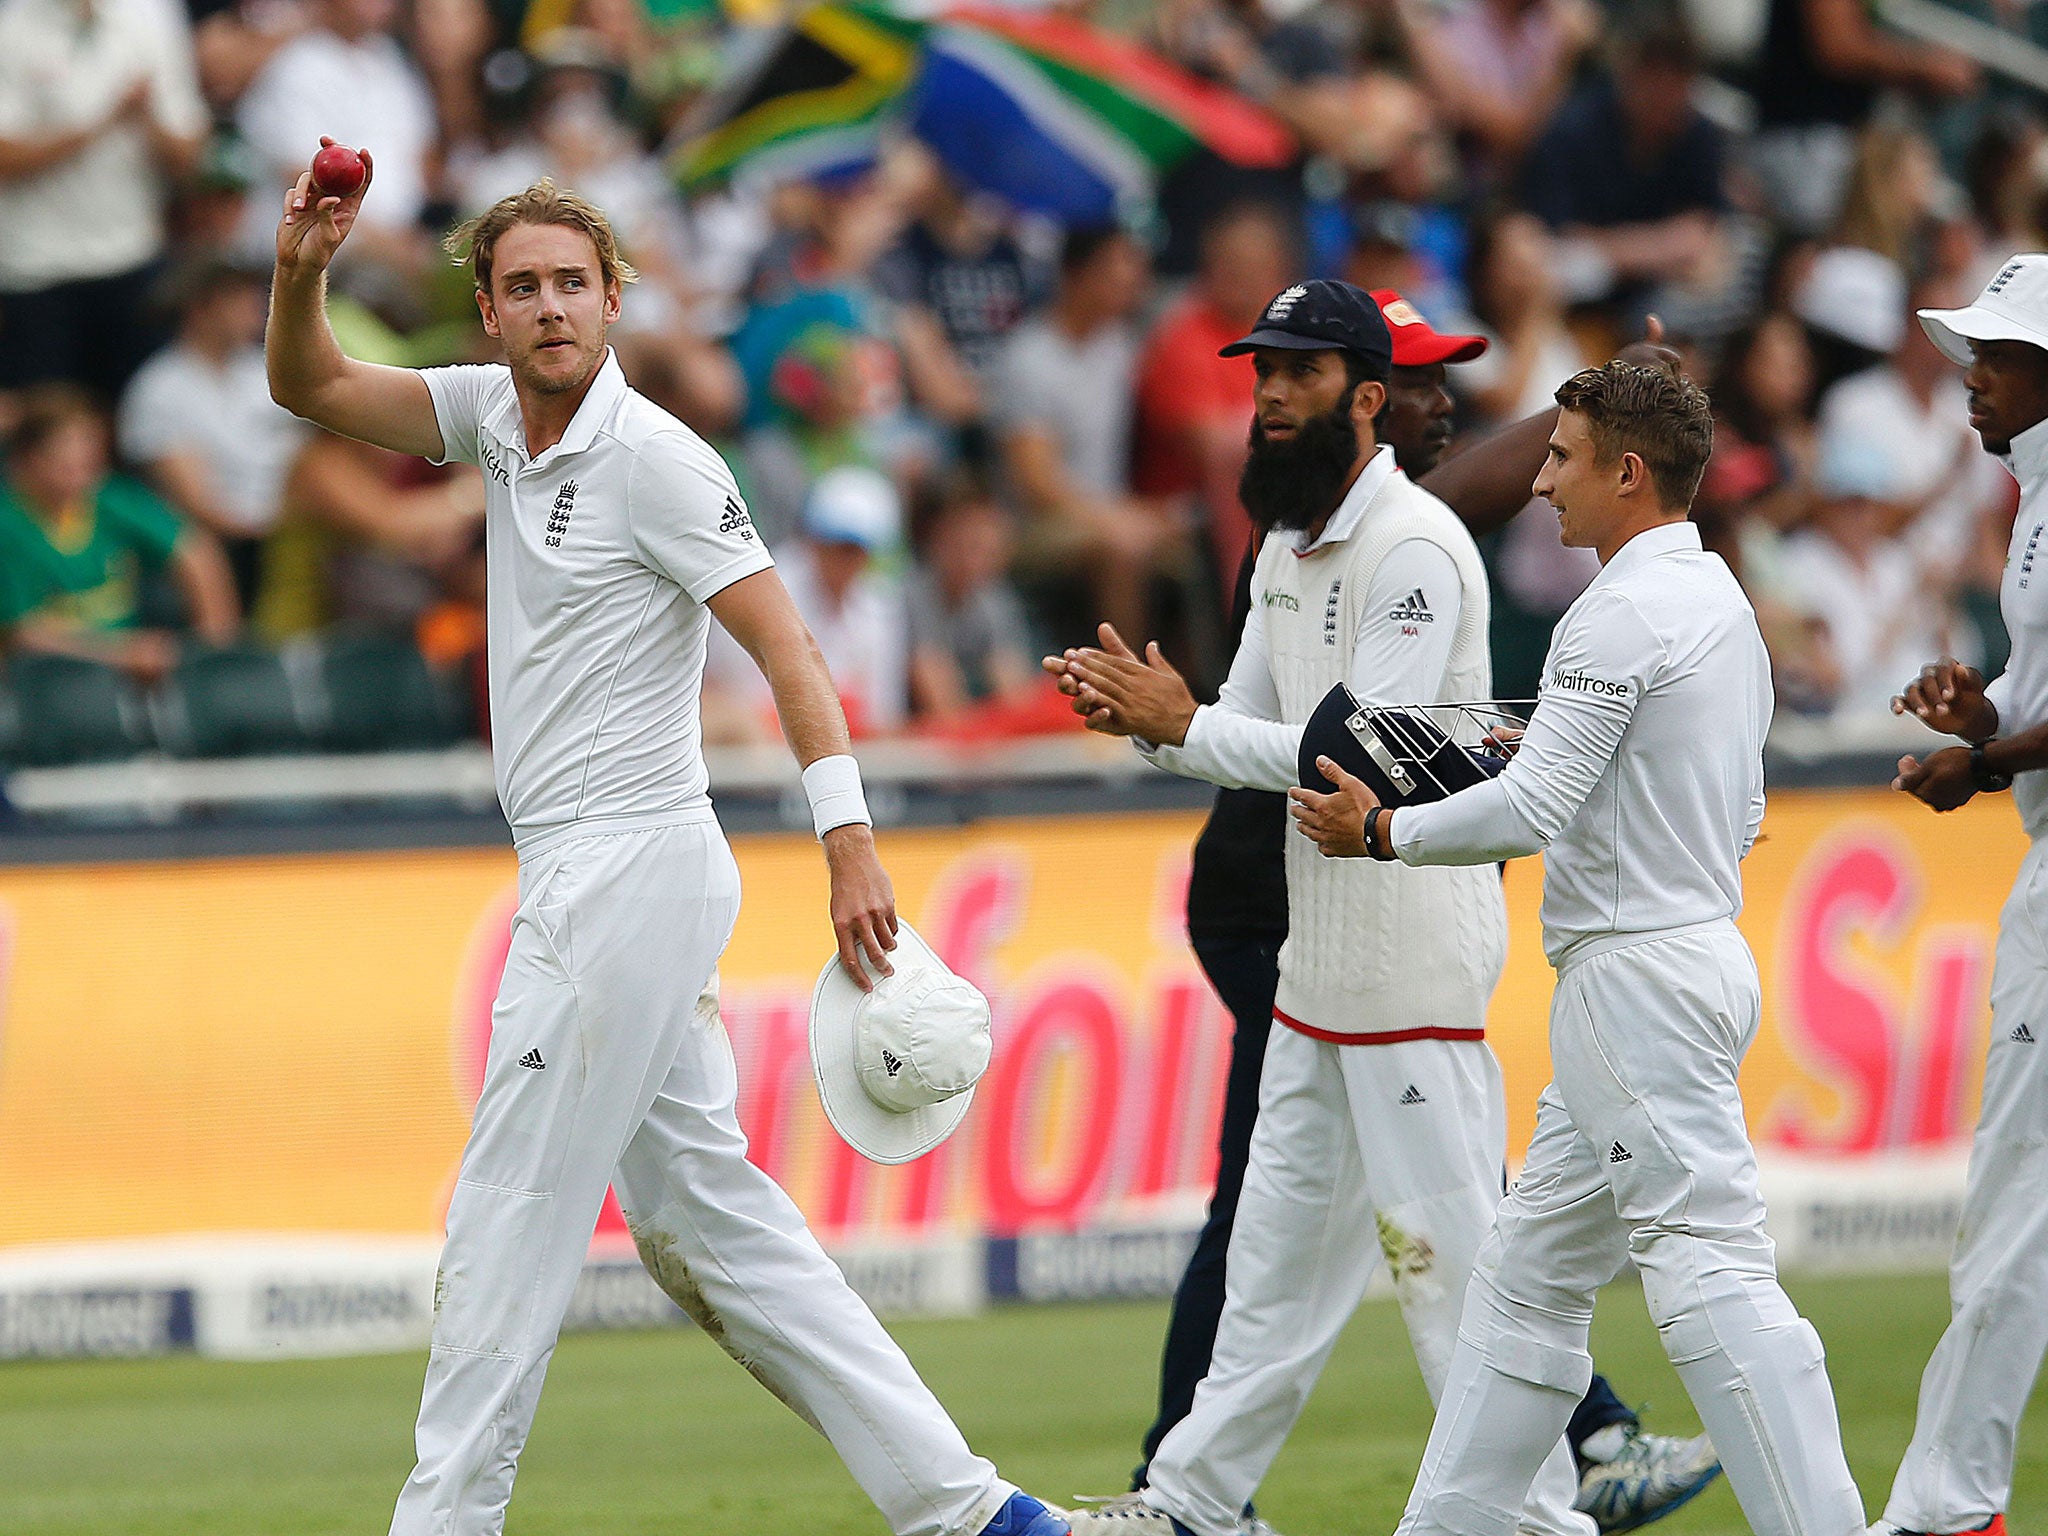 Stuart Broad takes the plaudits after finishing with figures of 6-17